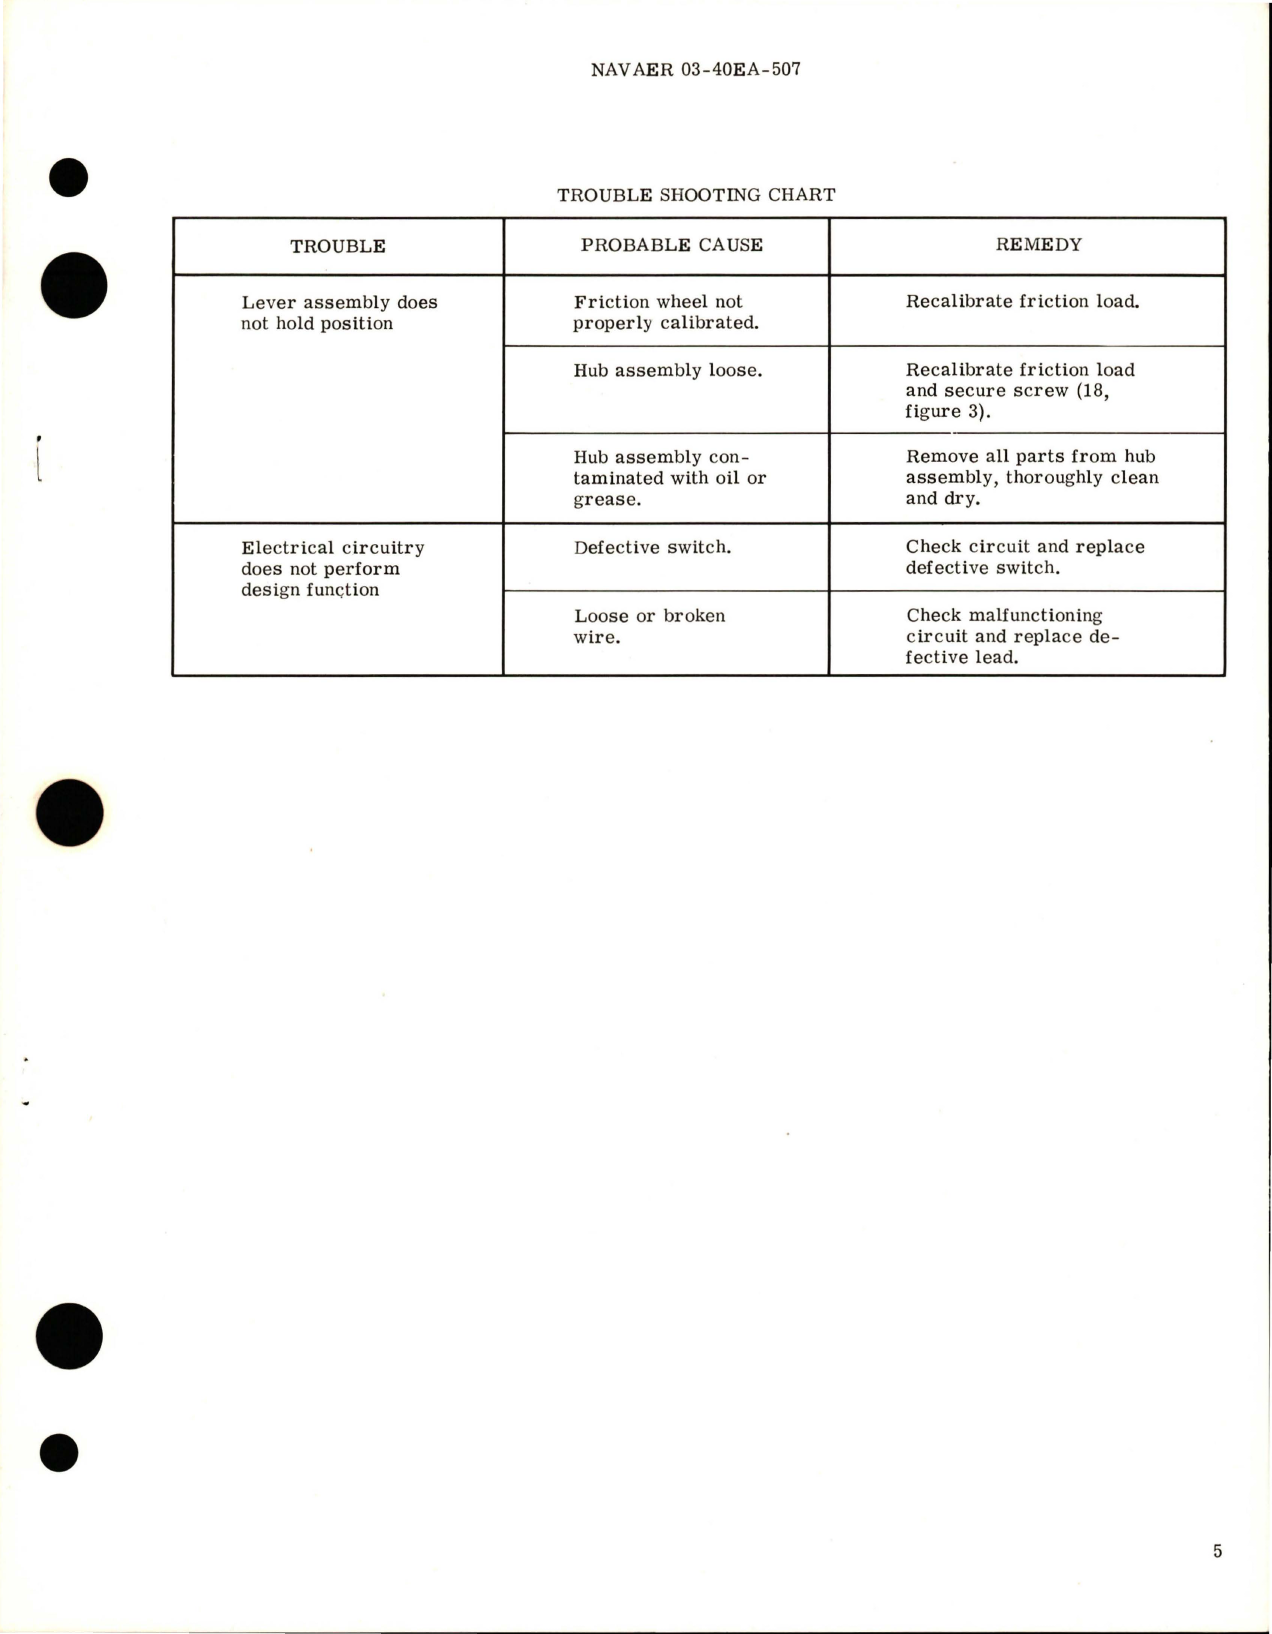 Sample page 5 from AirCorps Library document: Overhaul Instructions with Parts Breakdown for Engine Control Quadrant - Part 5L3294 